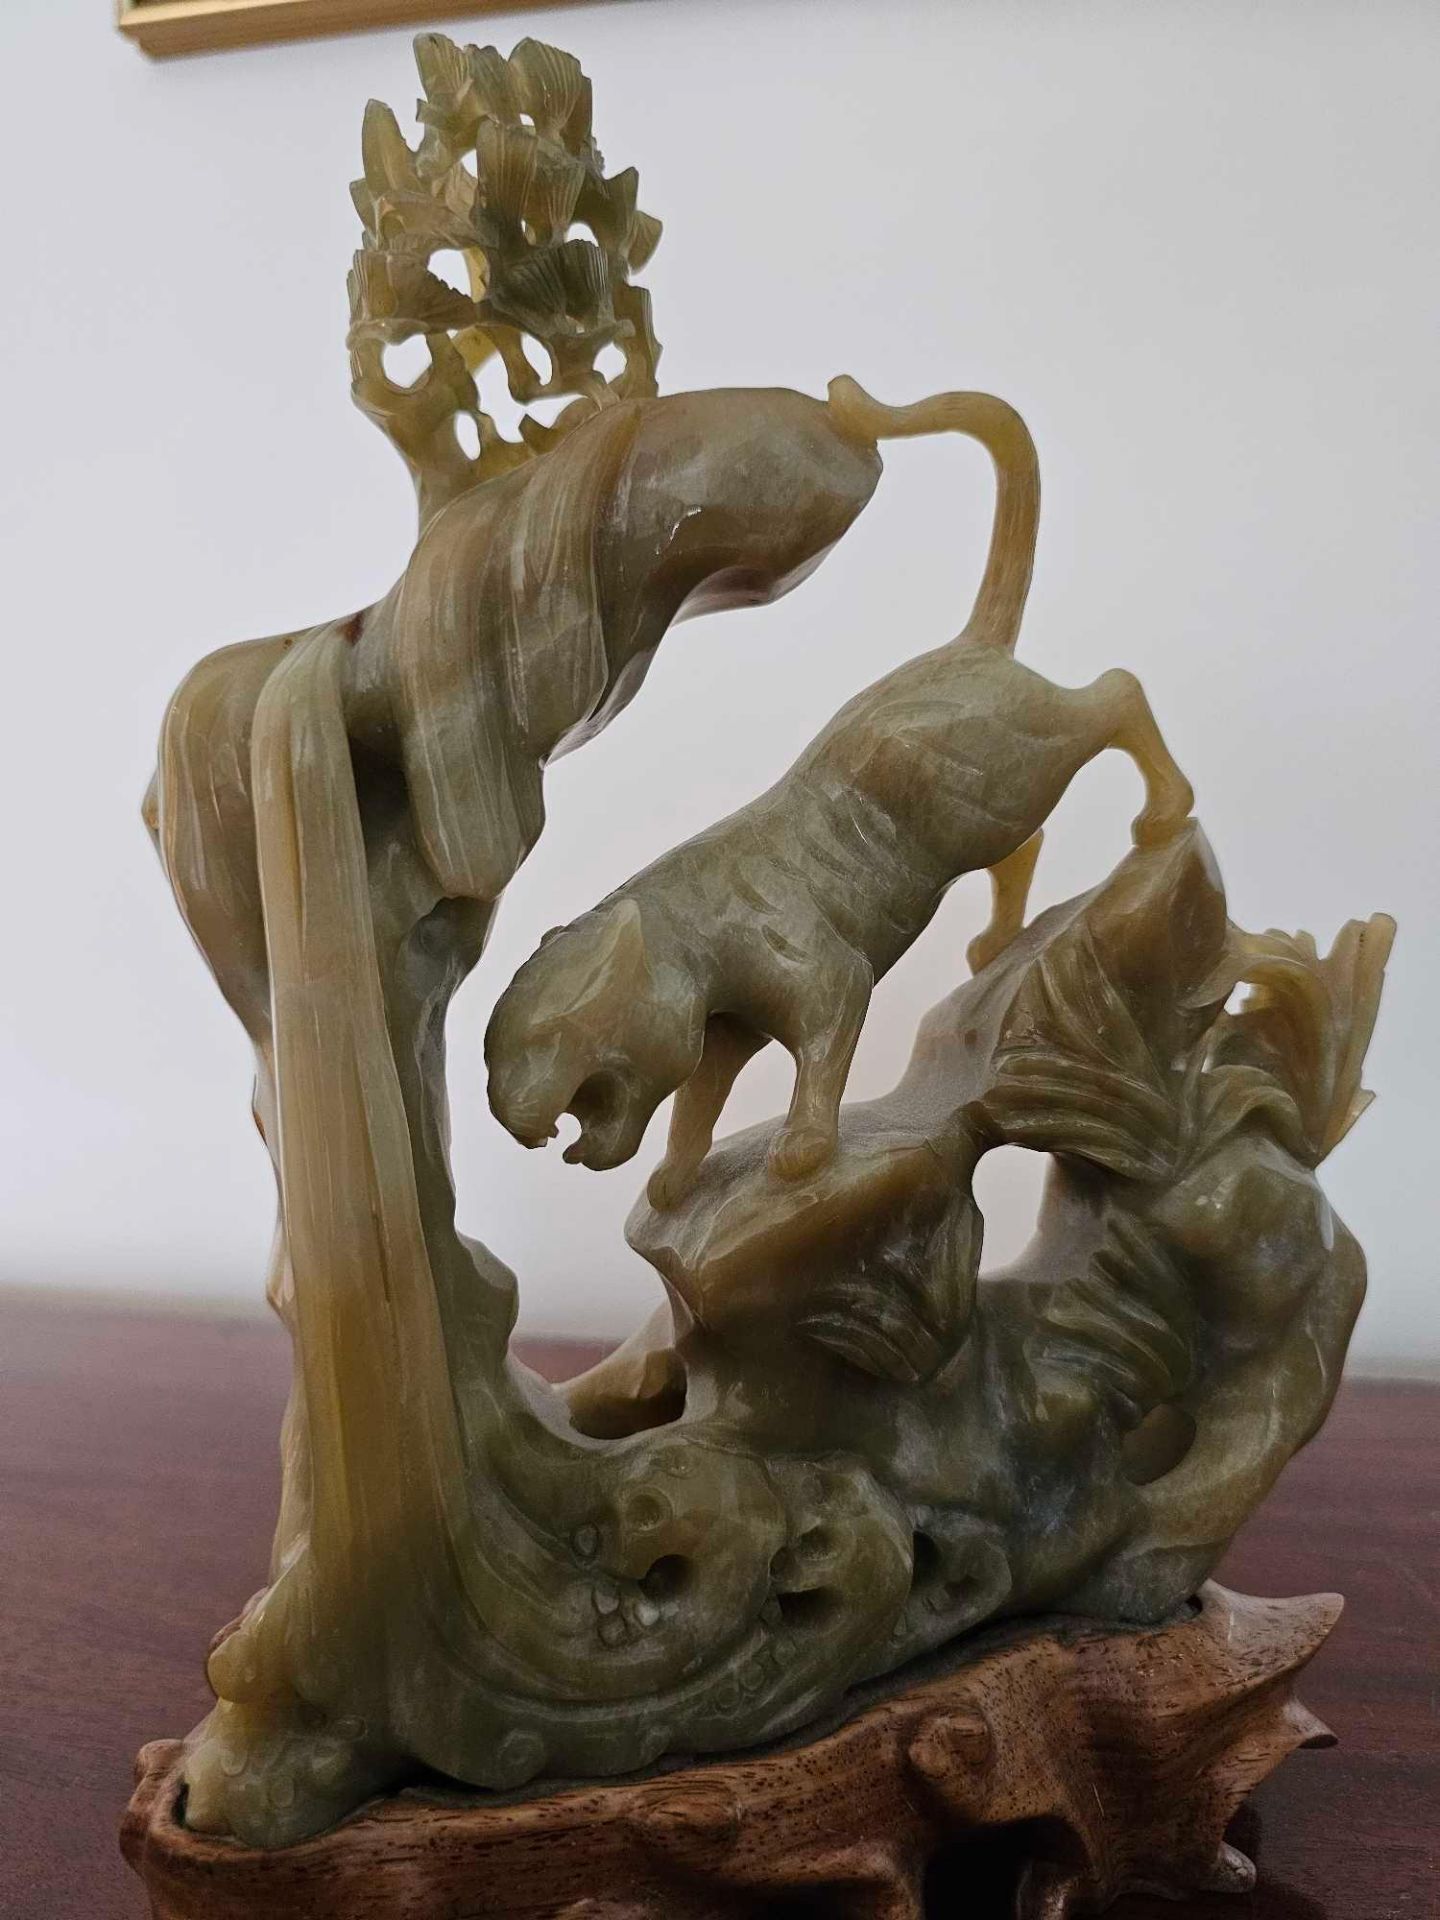 A Bowenite Or Nephrite (Serpentine) Which Is Often Called "New Jade" Figure Of A Tiger Beside A - Image 3 of 4